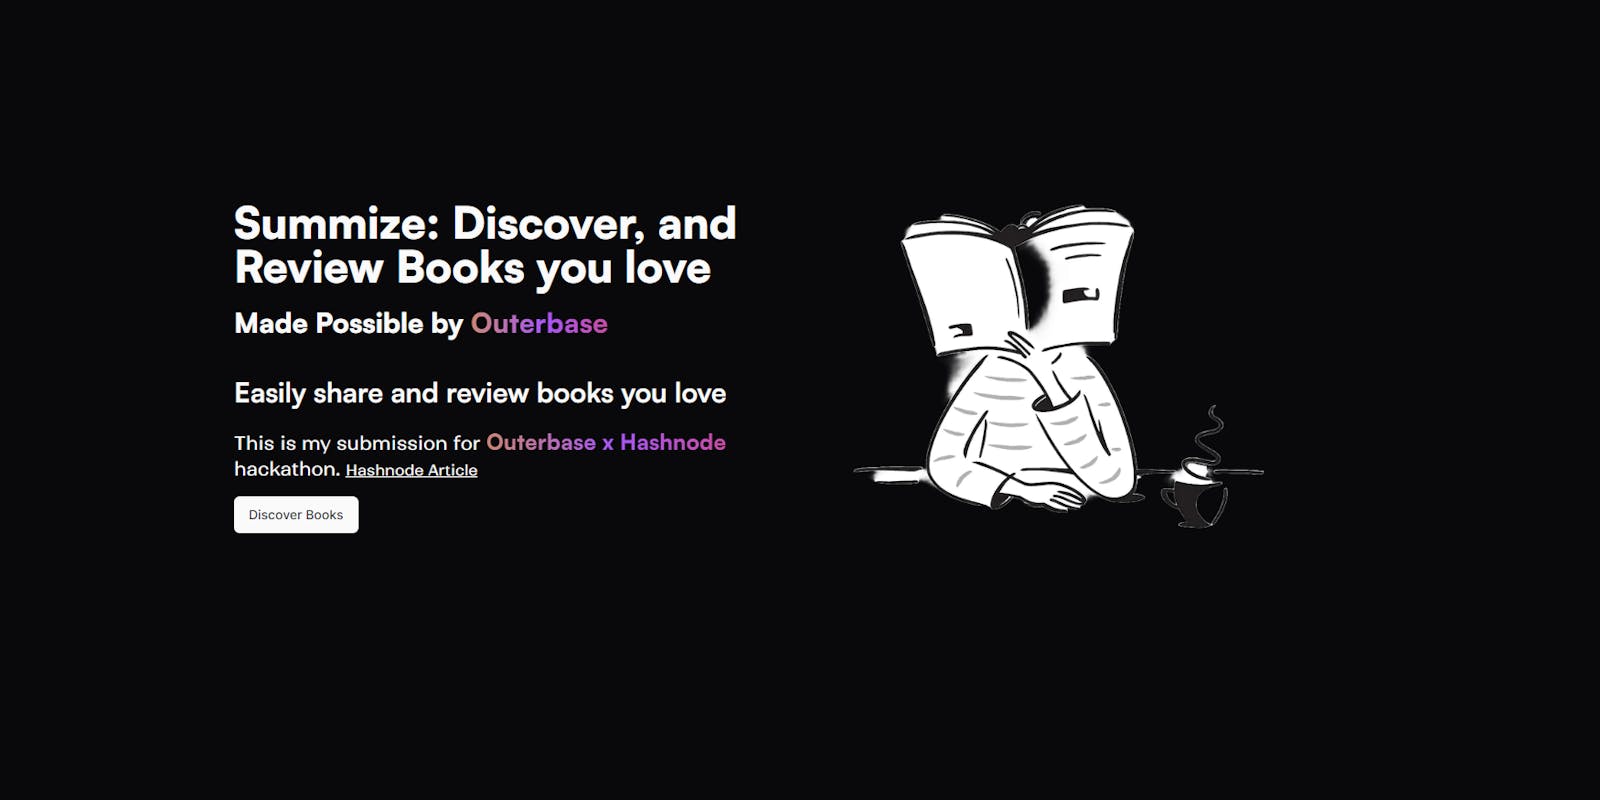 Share and Review books you love with "Summize"